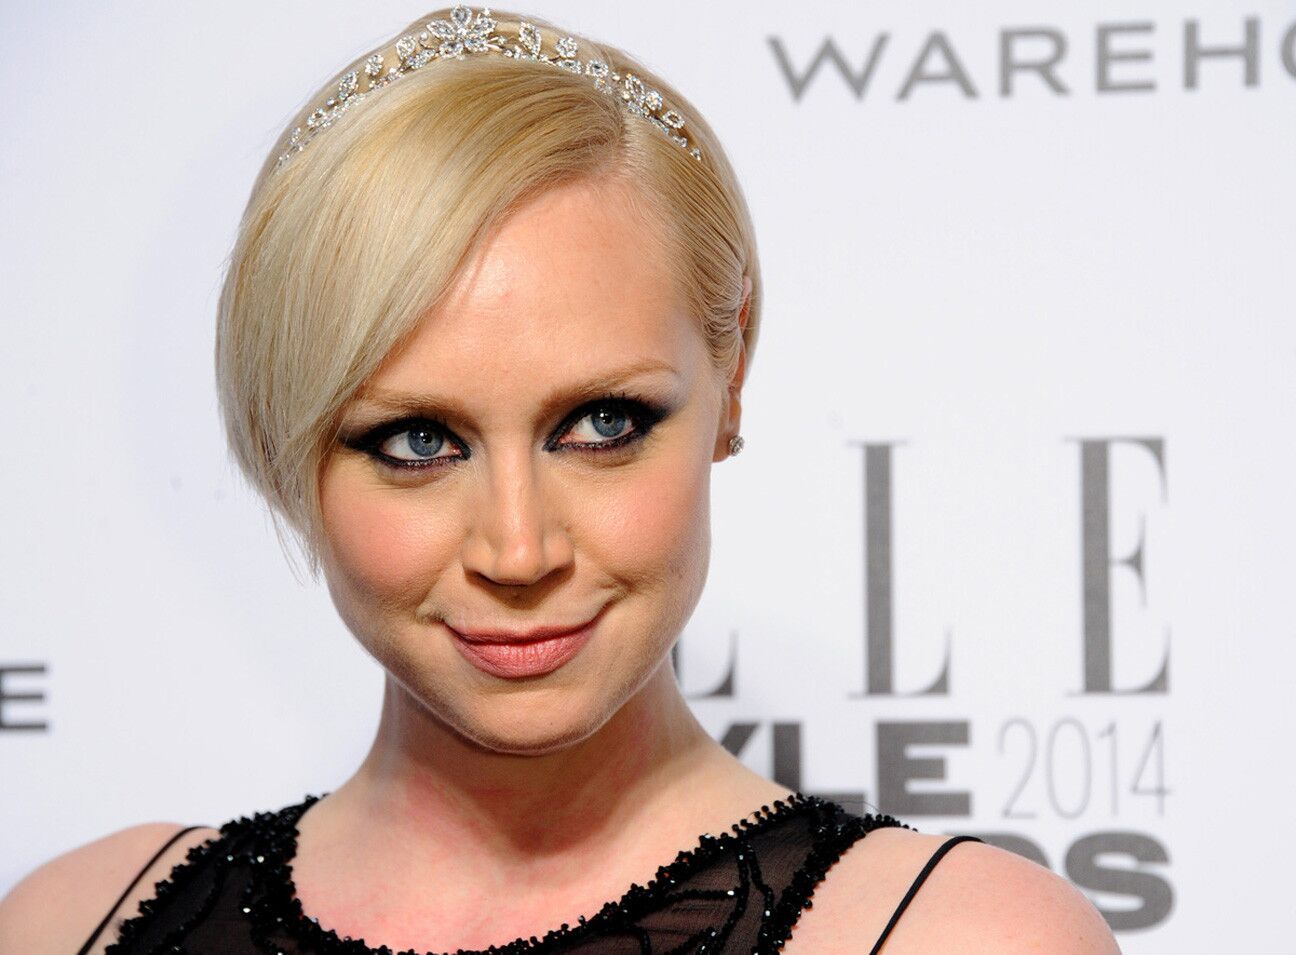 Gwendoline Christie, known for playing Brienne of Tarth in HBO's "Game of Thrones," has also been cast as Commander Lyme in "The Hunger Games: Mockingjay -- Part 2."